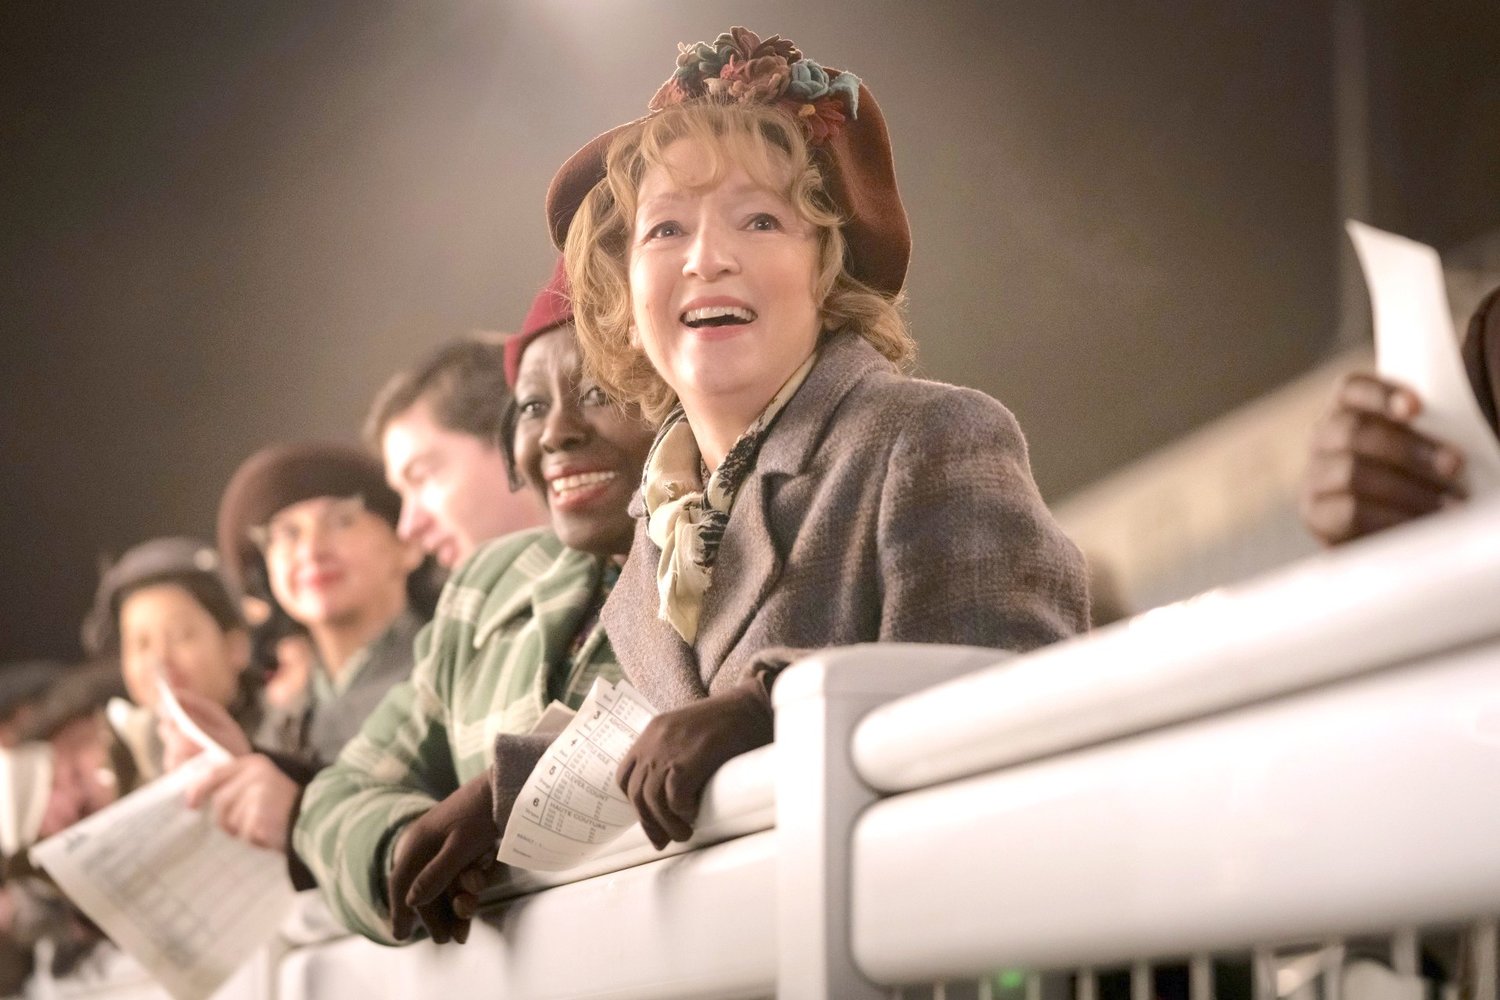 Ellen Thomas, center left, and Lesley Manville in a scene from "Mrs. Harris Goes to Paris."